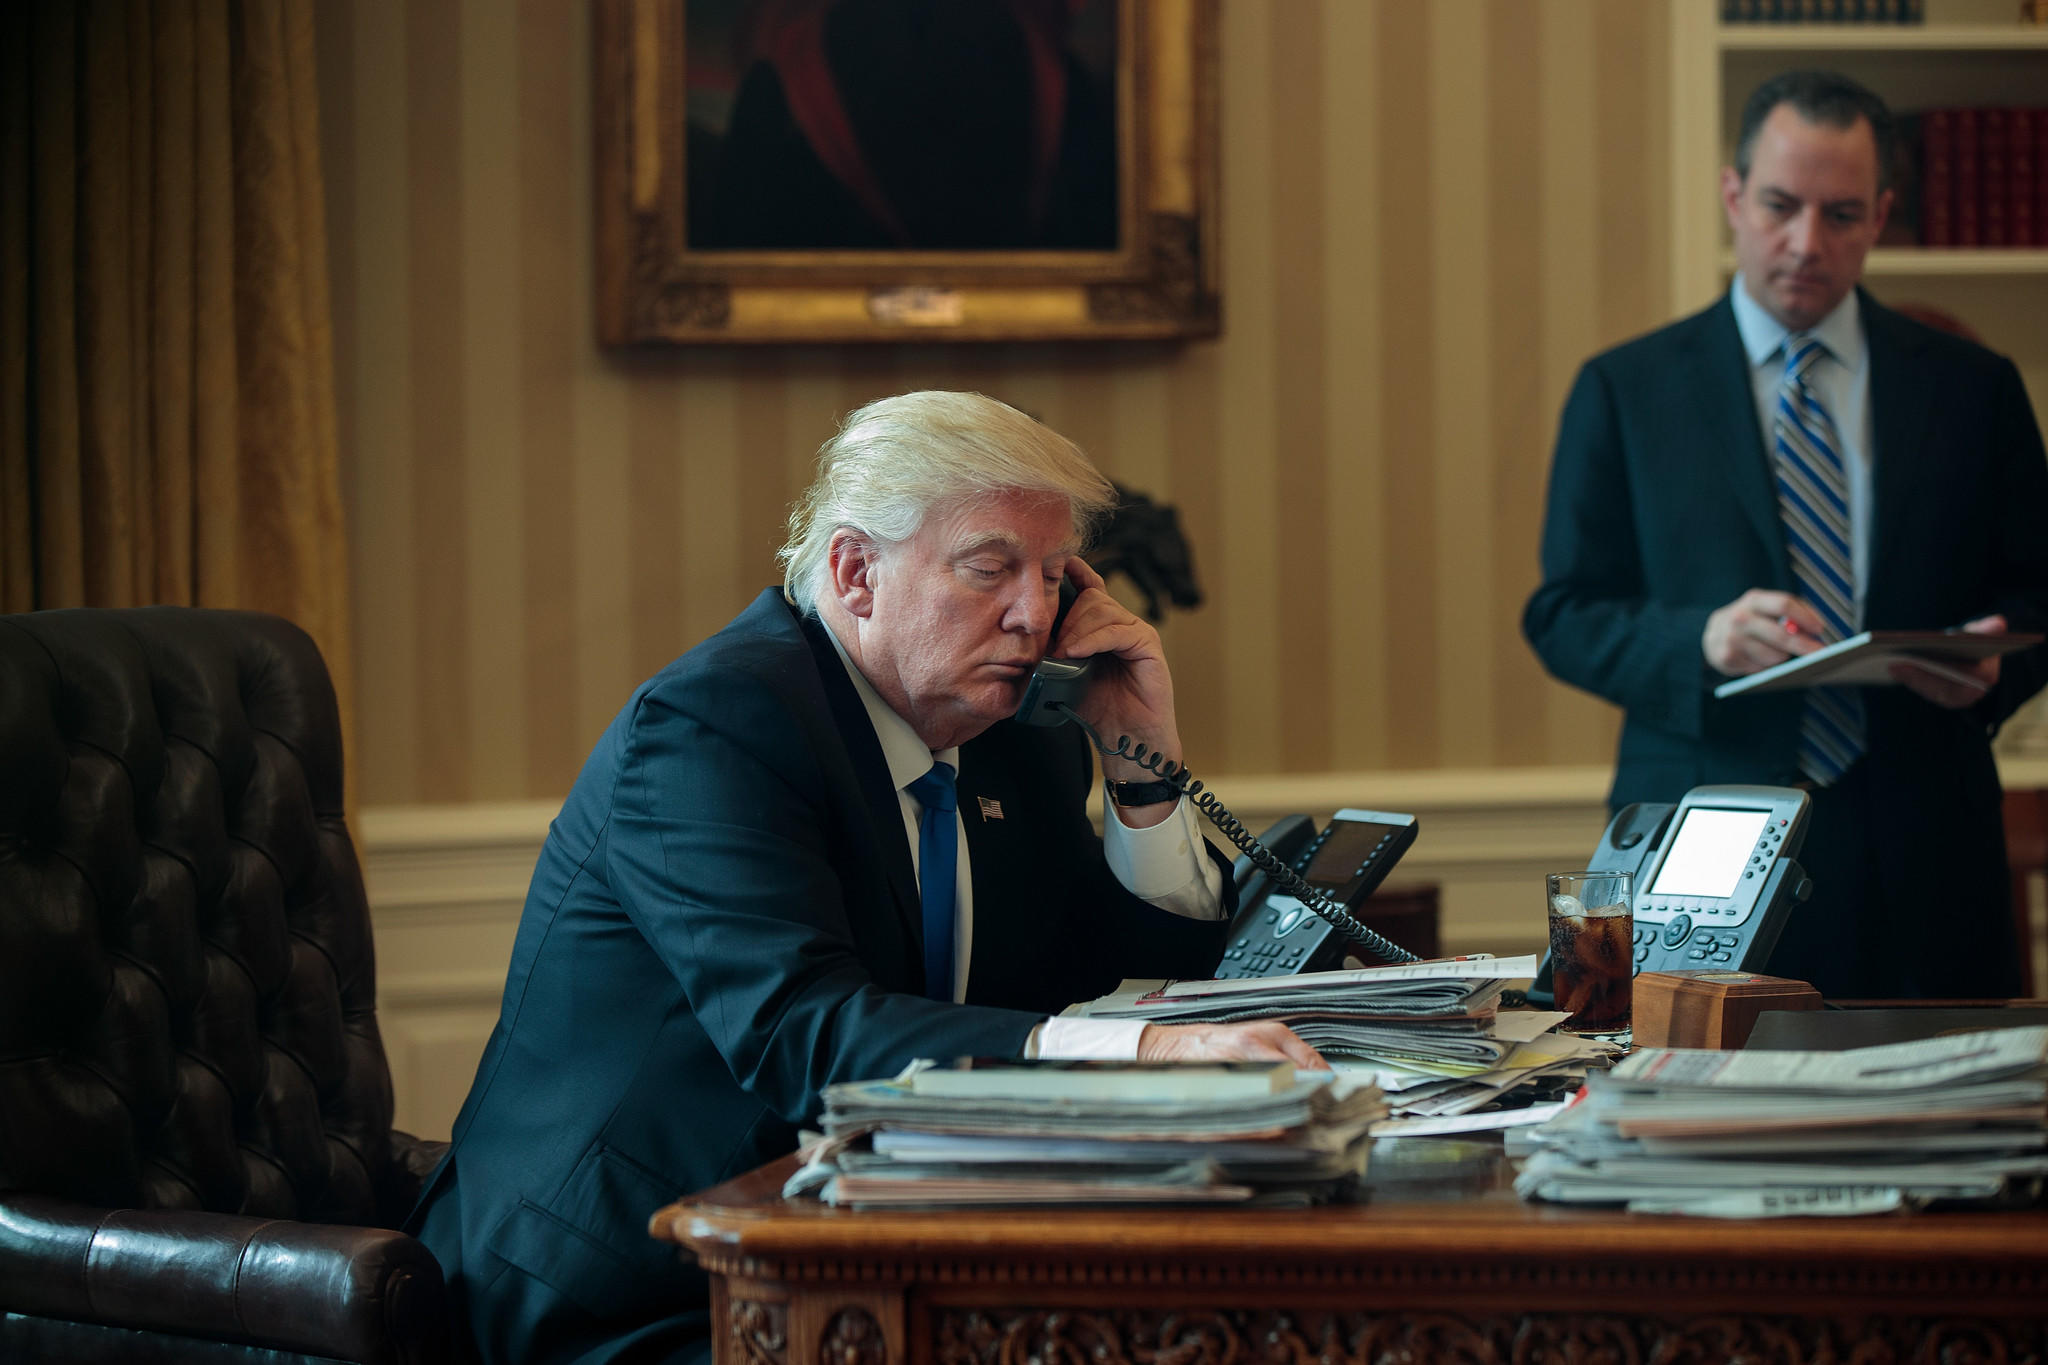 Trump speaks by phone with Putin as White House Chief of Staff Reince Priebus looks on.